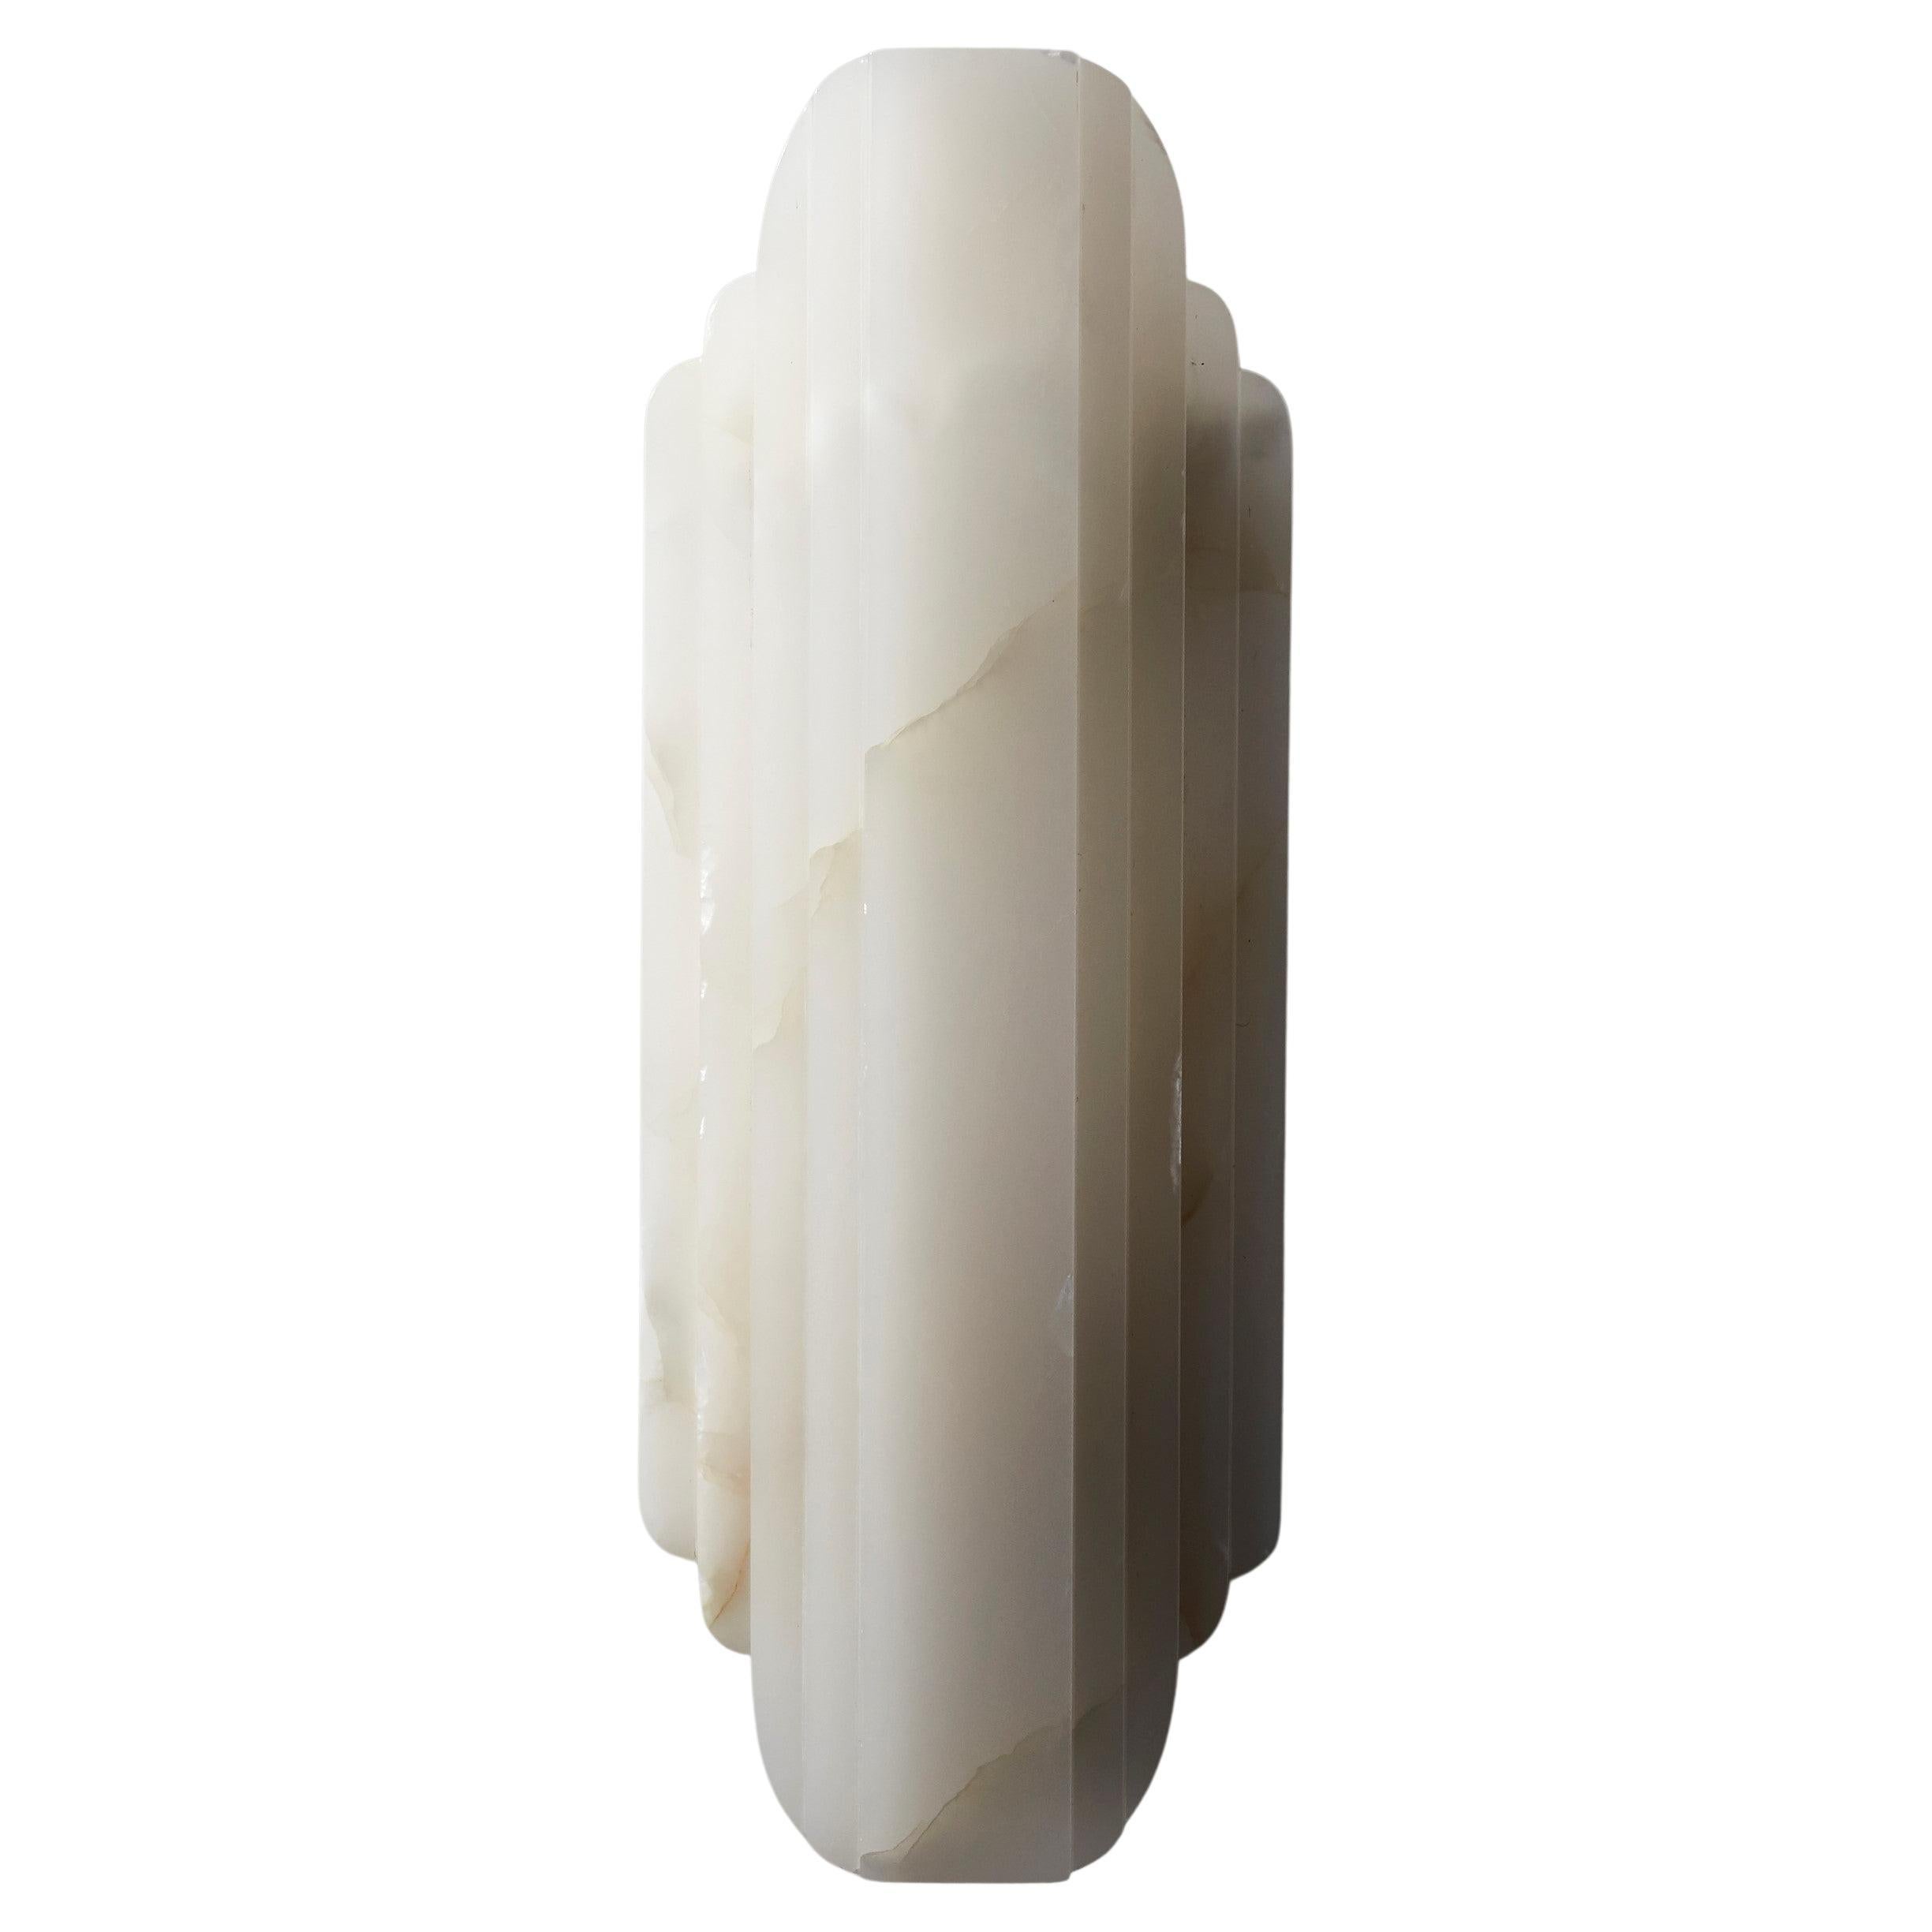 Walljewel white onyx by Lisette Rützou
Dimensions: 15 x H 42 cm
Materials: Rose, green and white onyx.

 Lisette Rützou’s design is motivated by an urge to articulate a story. Inspired by the beauty of materials, form and architecture, each